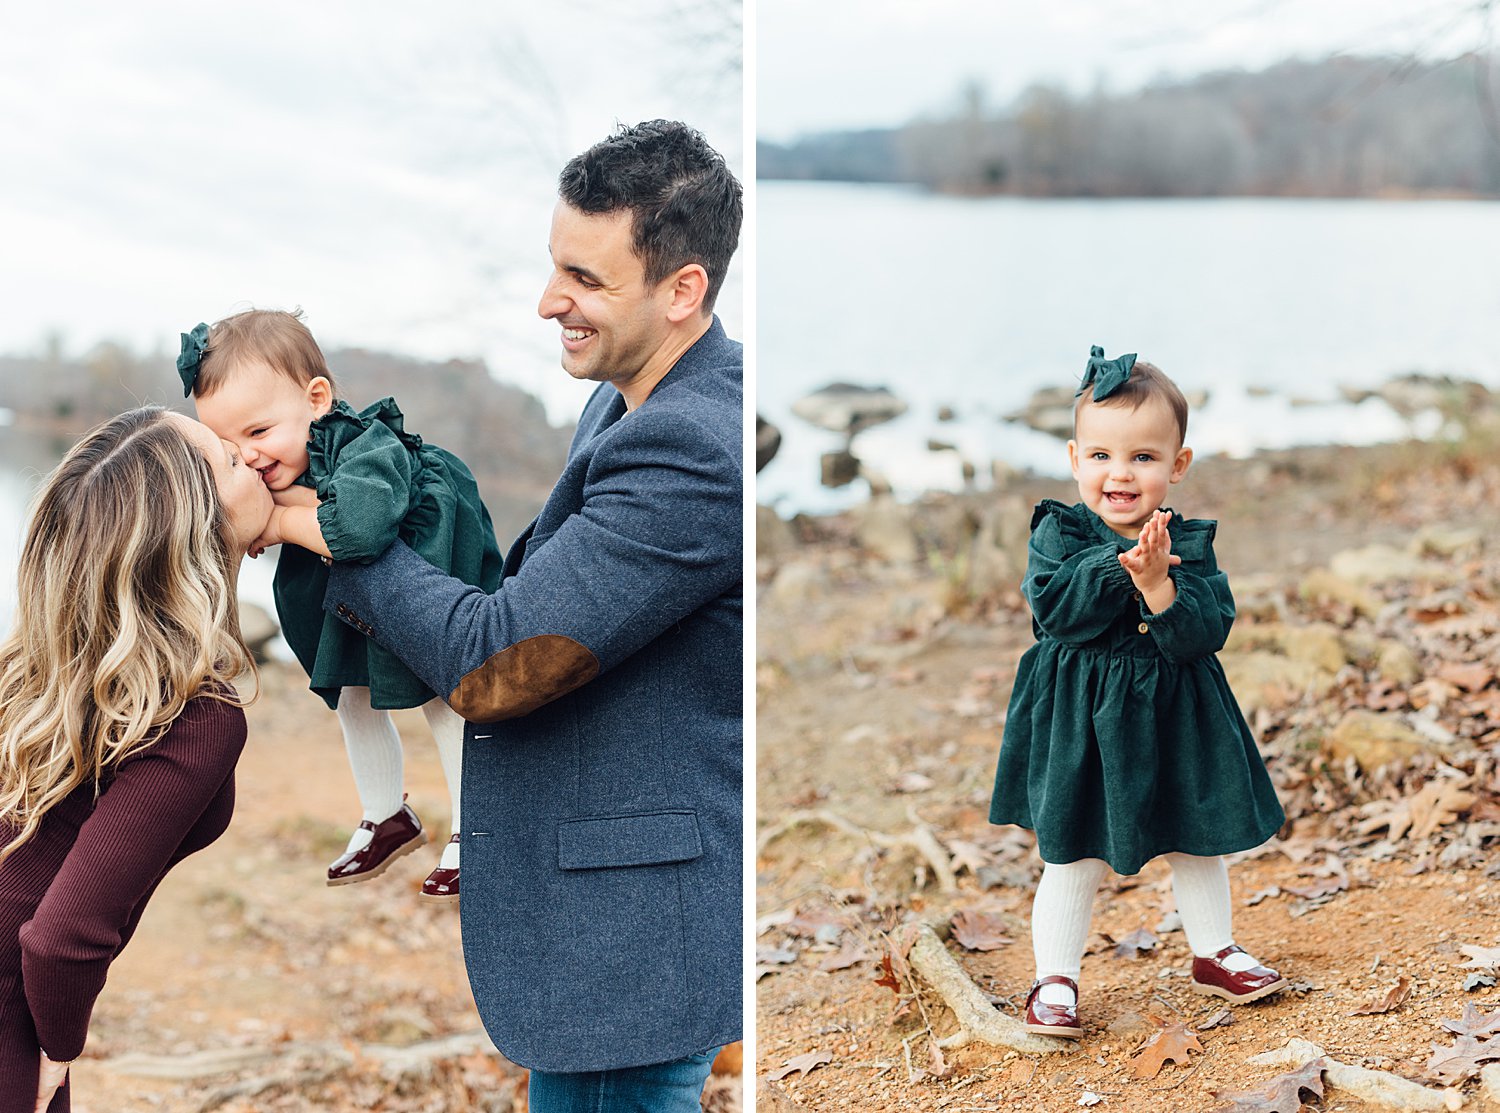 The Laibs - Lake Needwood Family Session - Montgomery County Maryland family photographer - Alison Dunn Photography photo